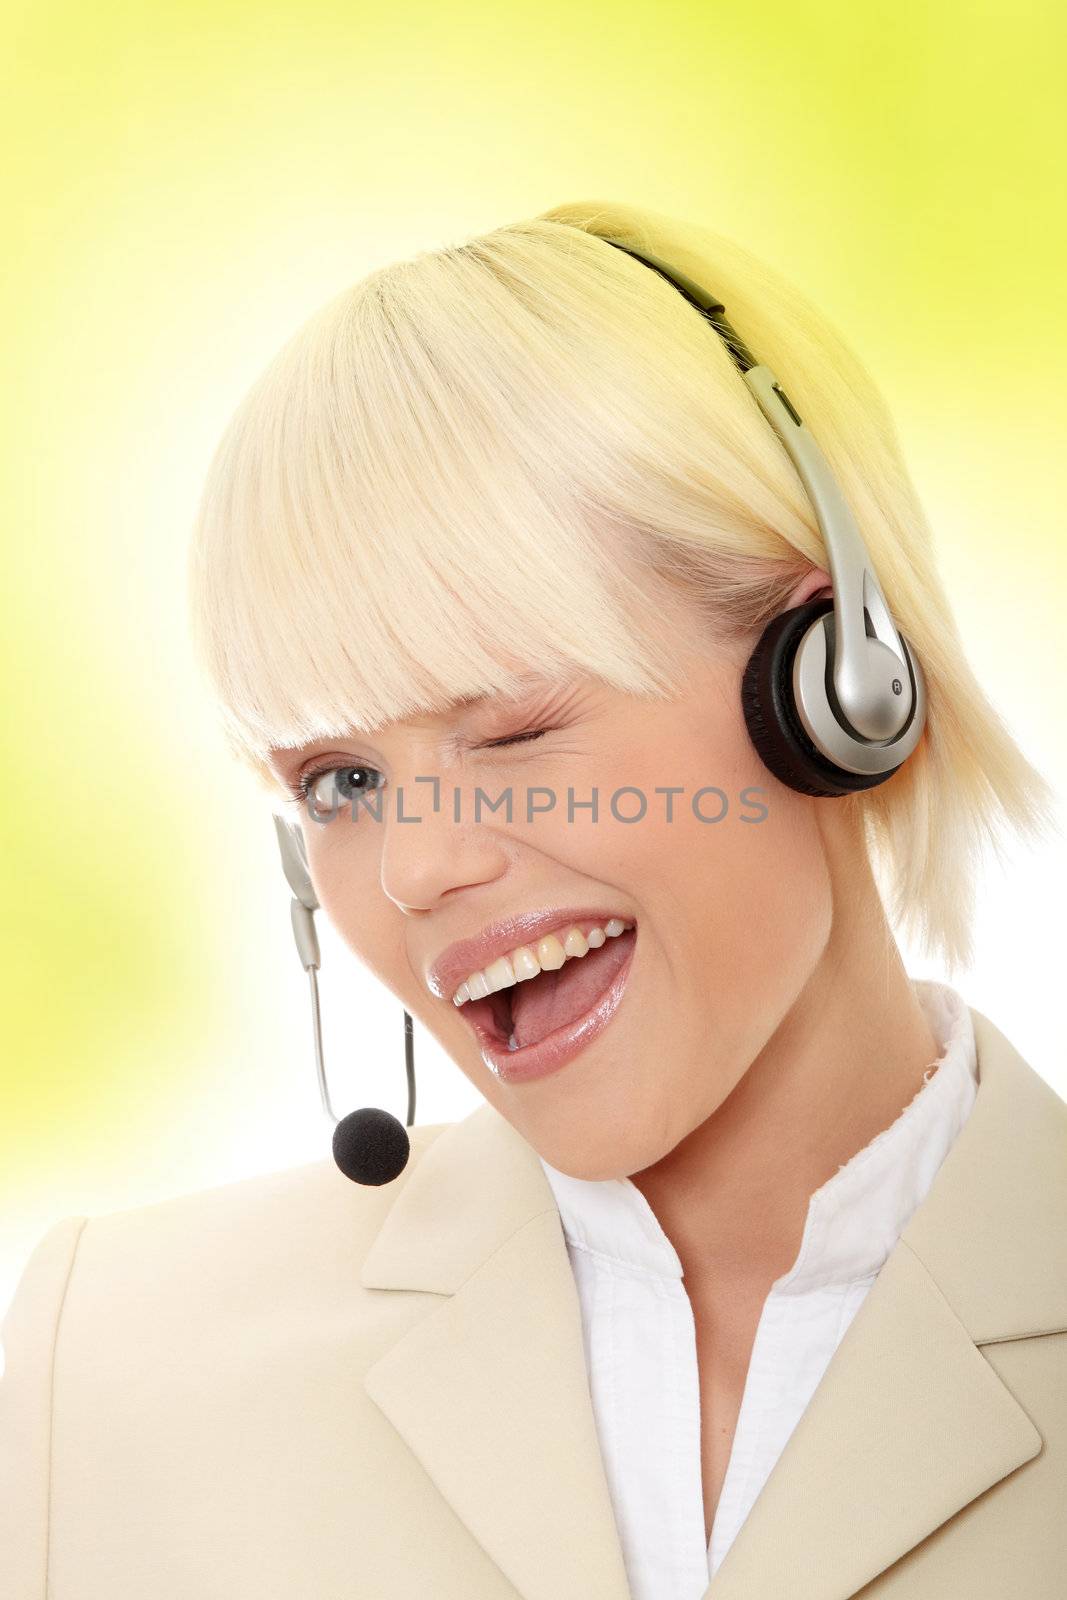 Call center woman with headset. Over abstract green background